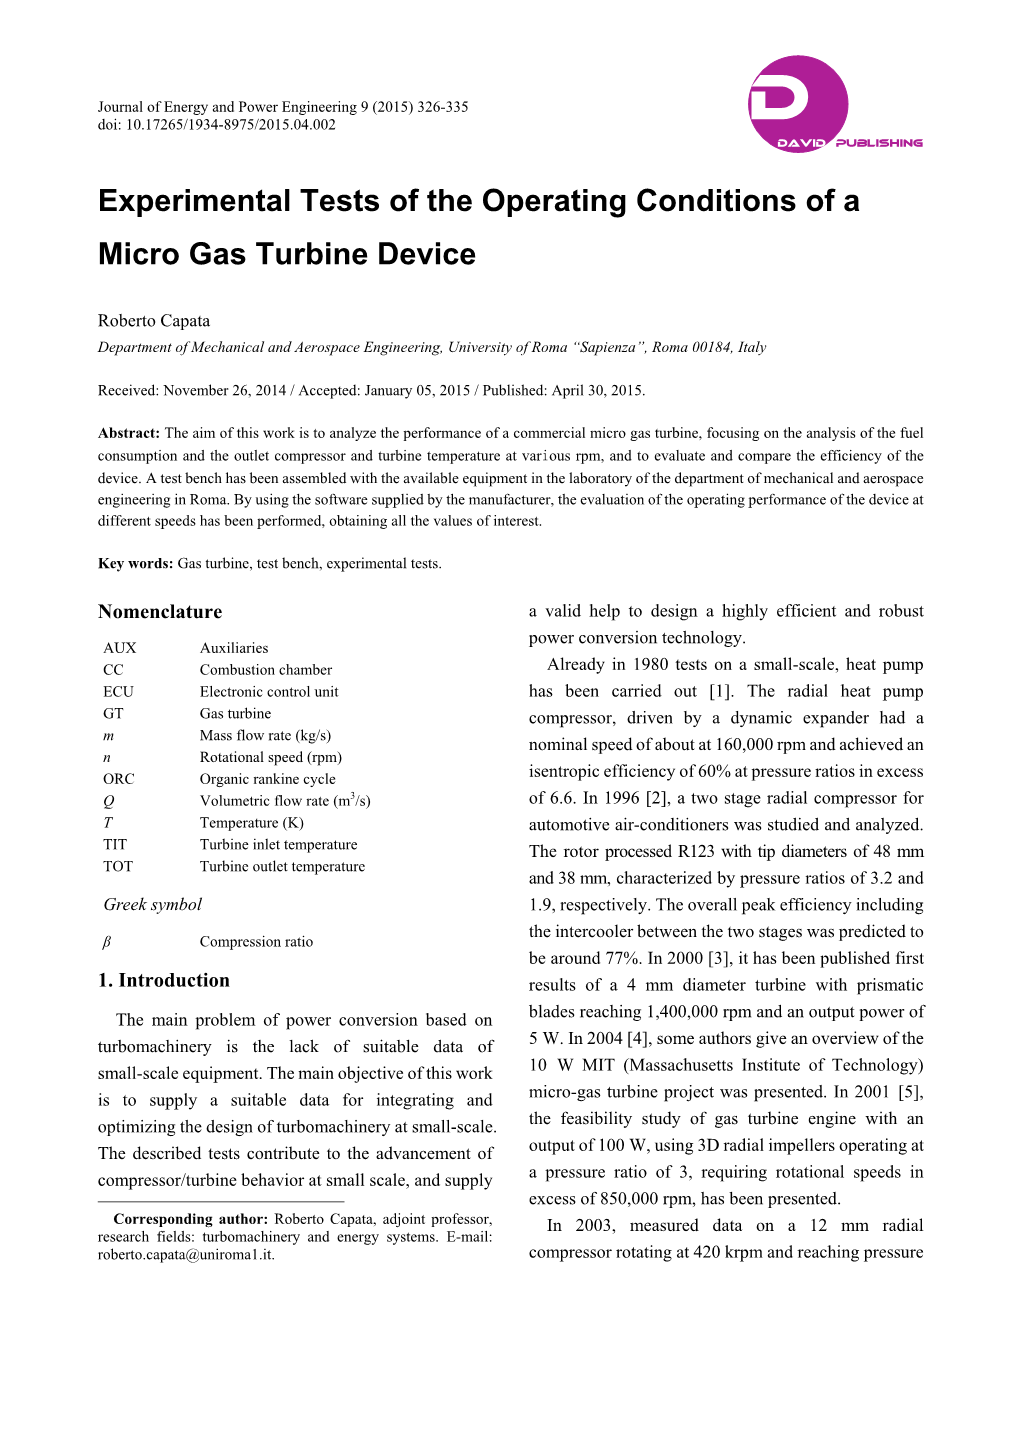 Experimental Tests of the Operating Conditions of a Micro Gas Turbine Device